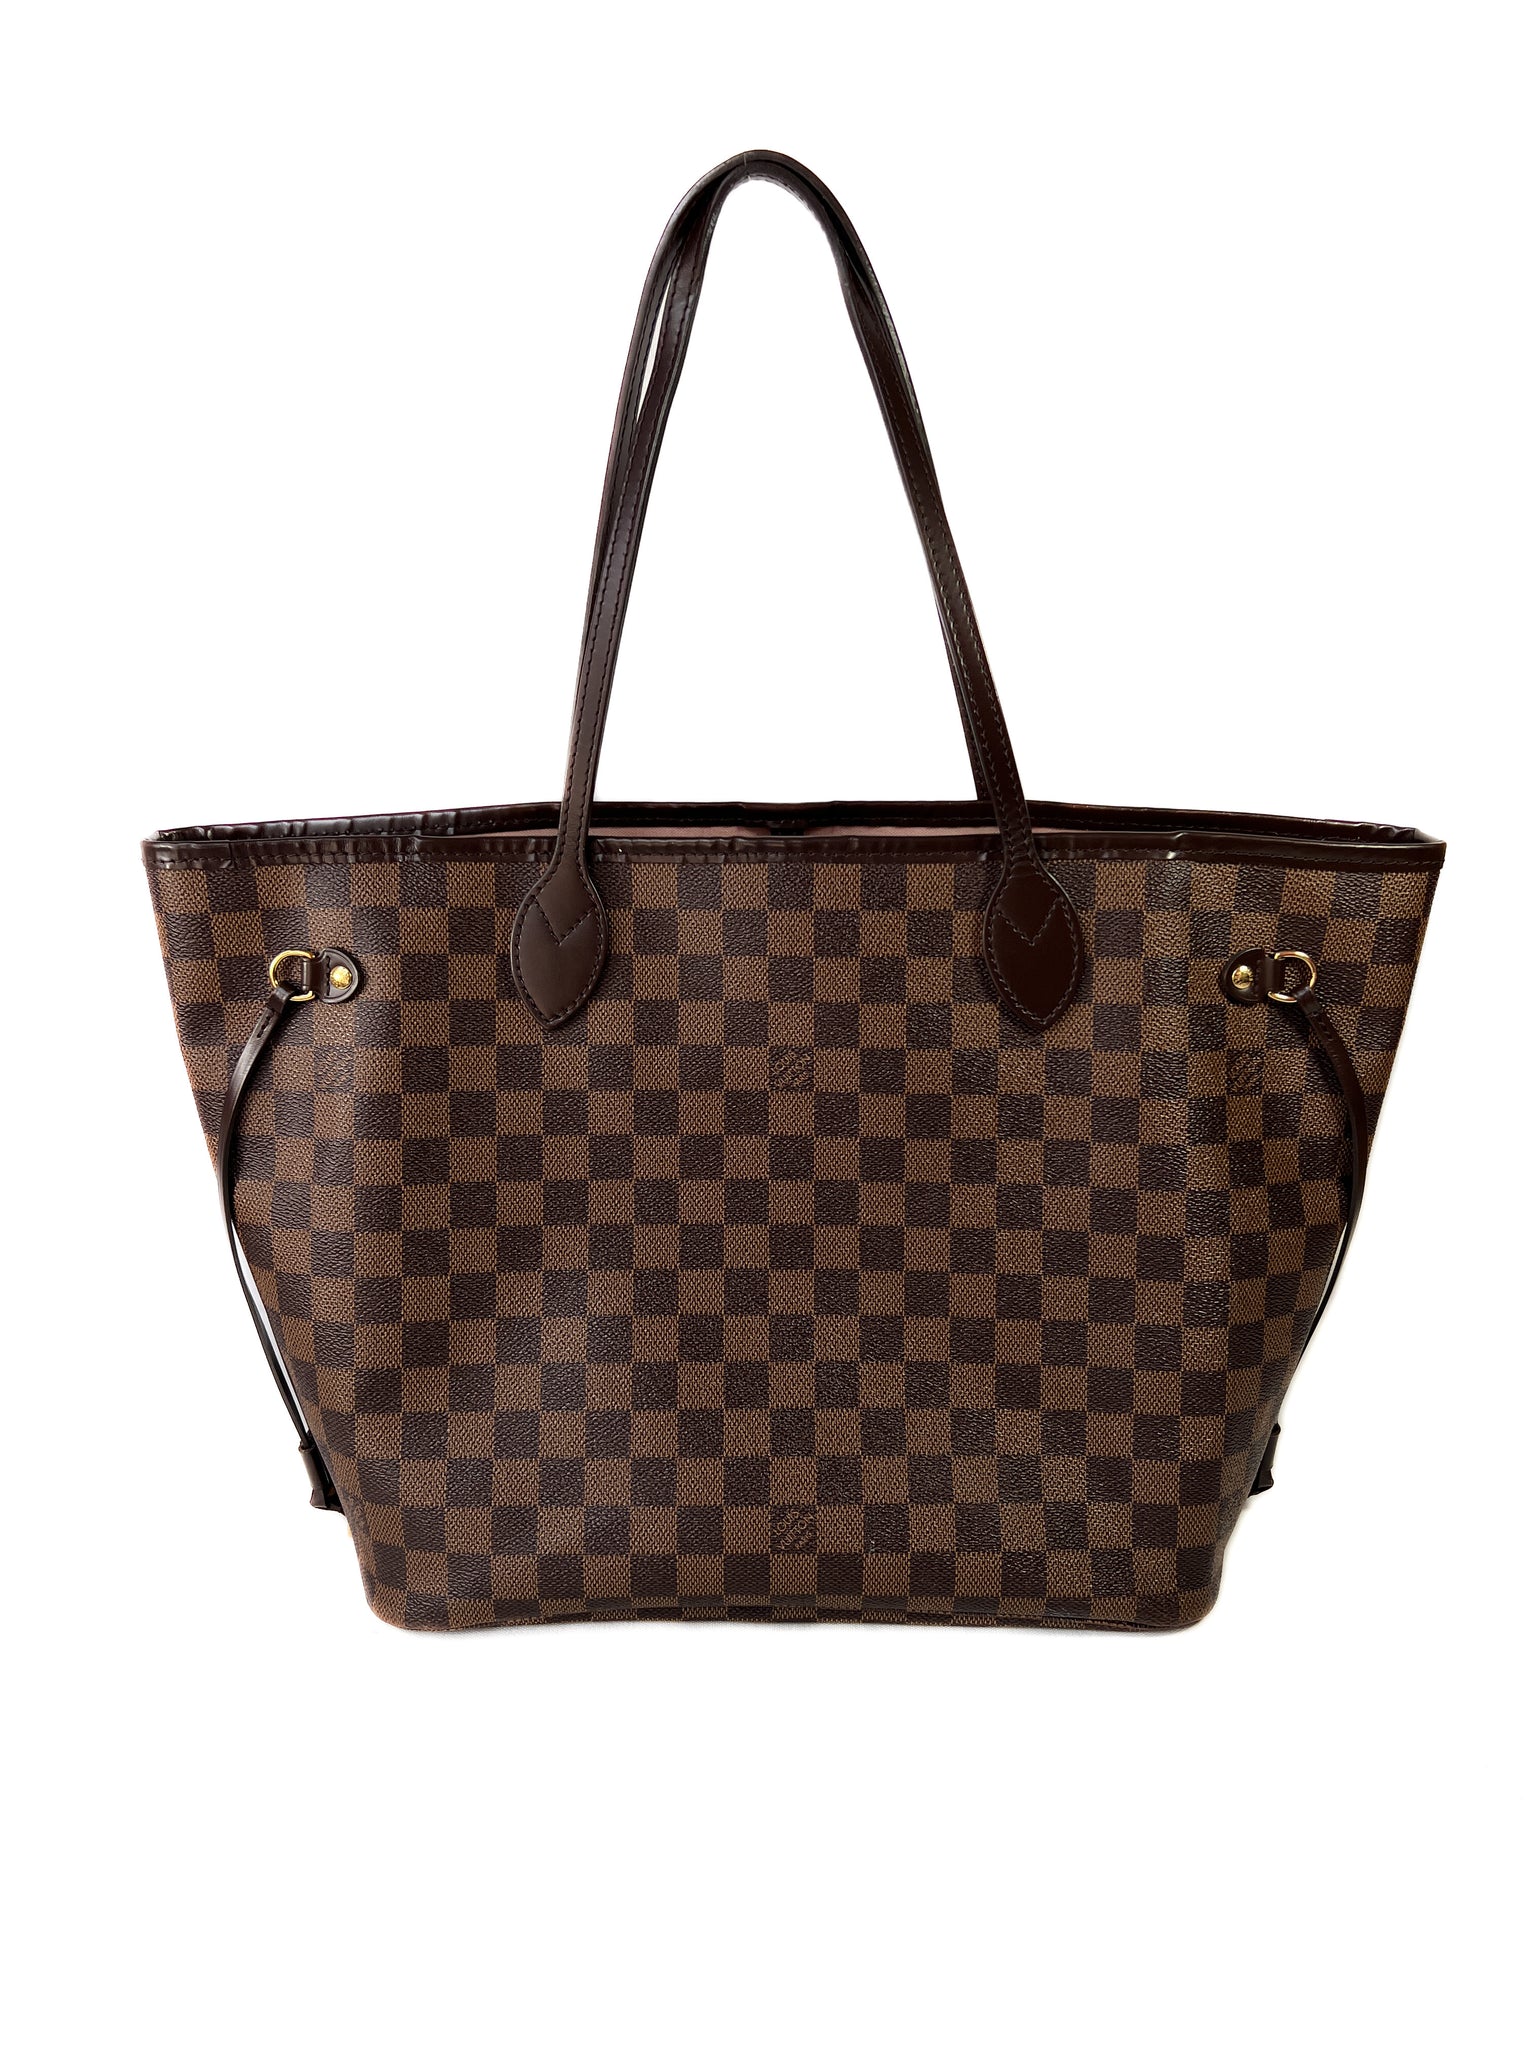 louis vuitton neverfull with pink